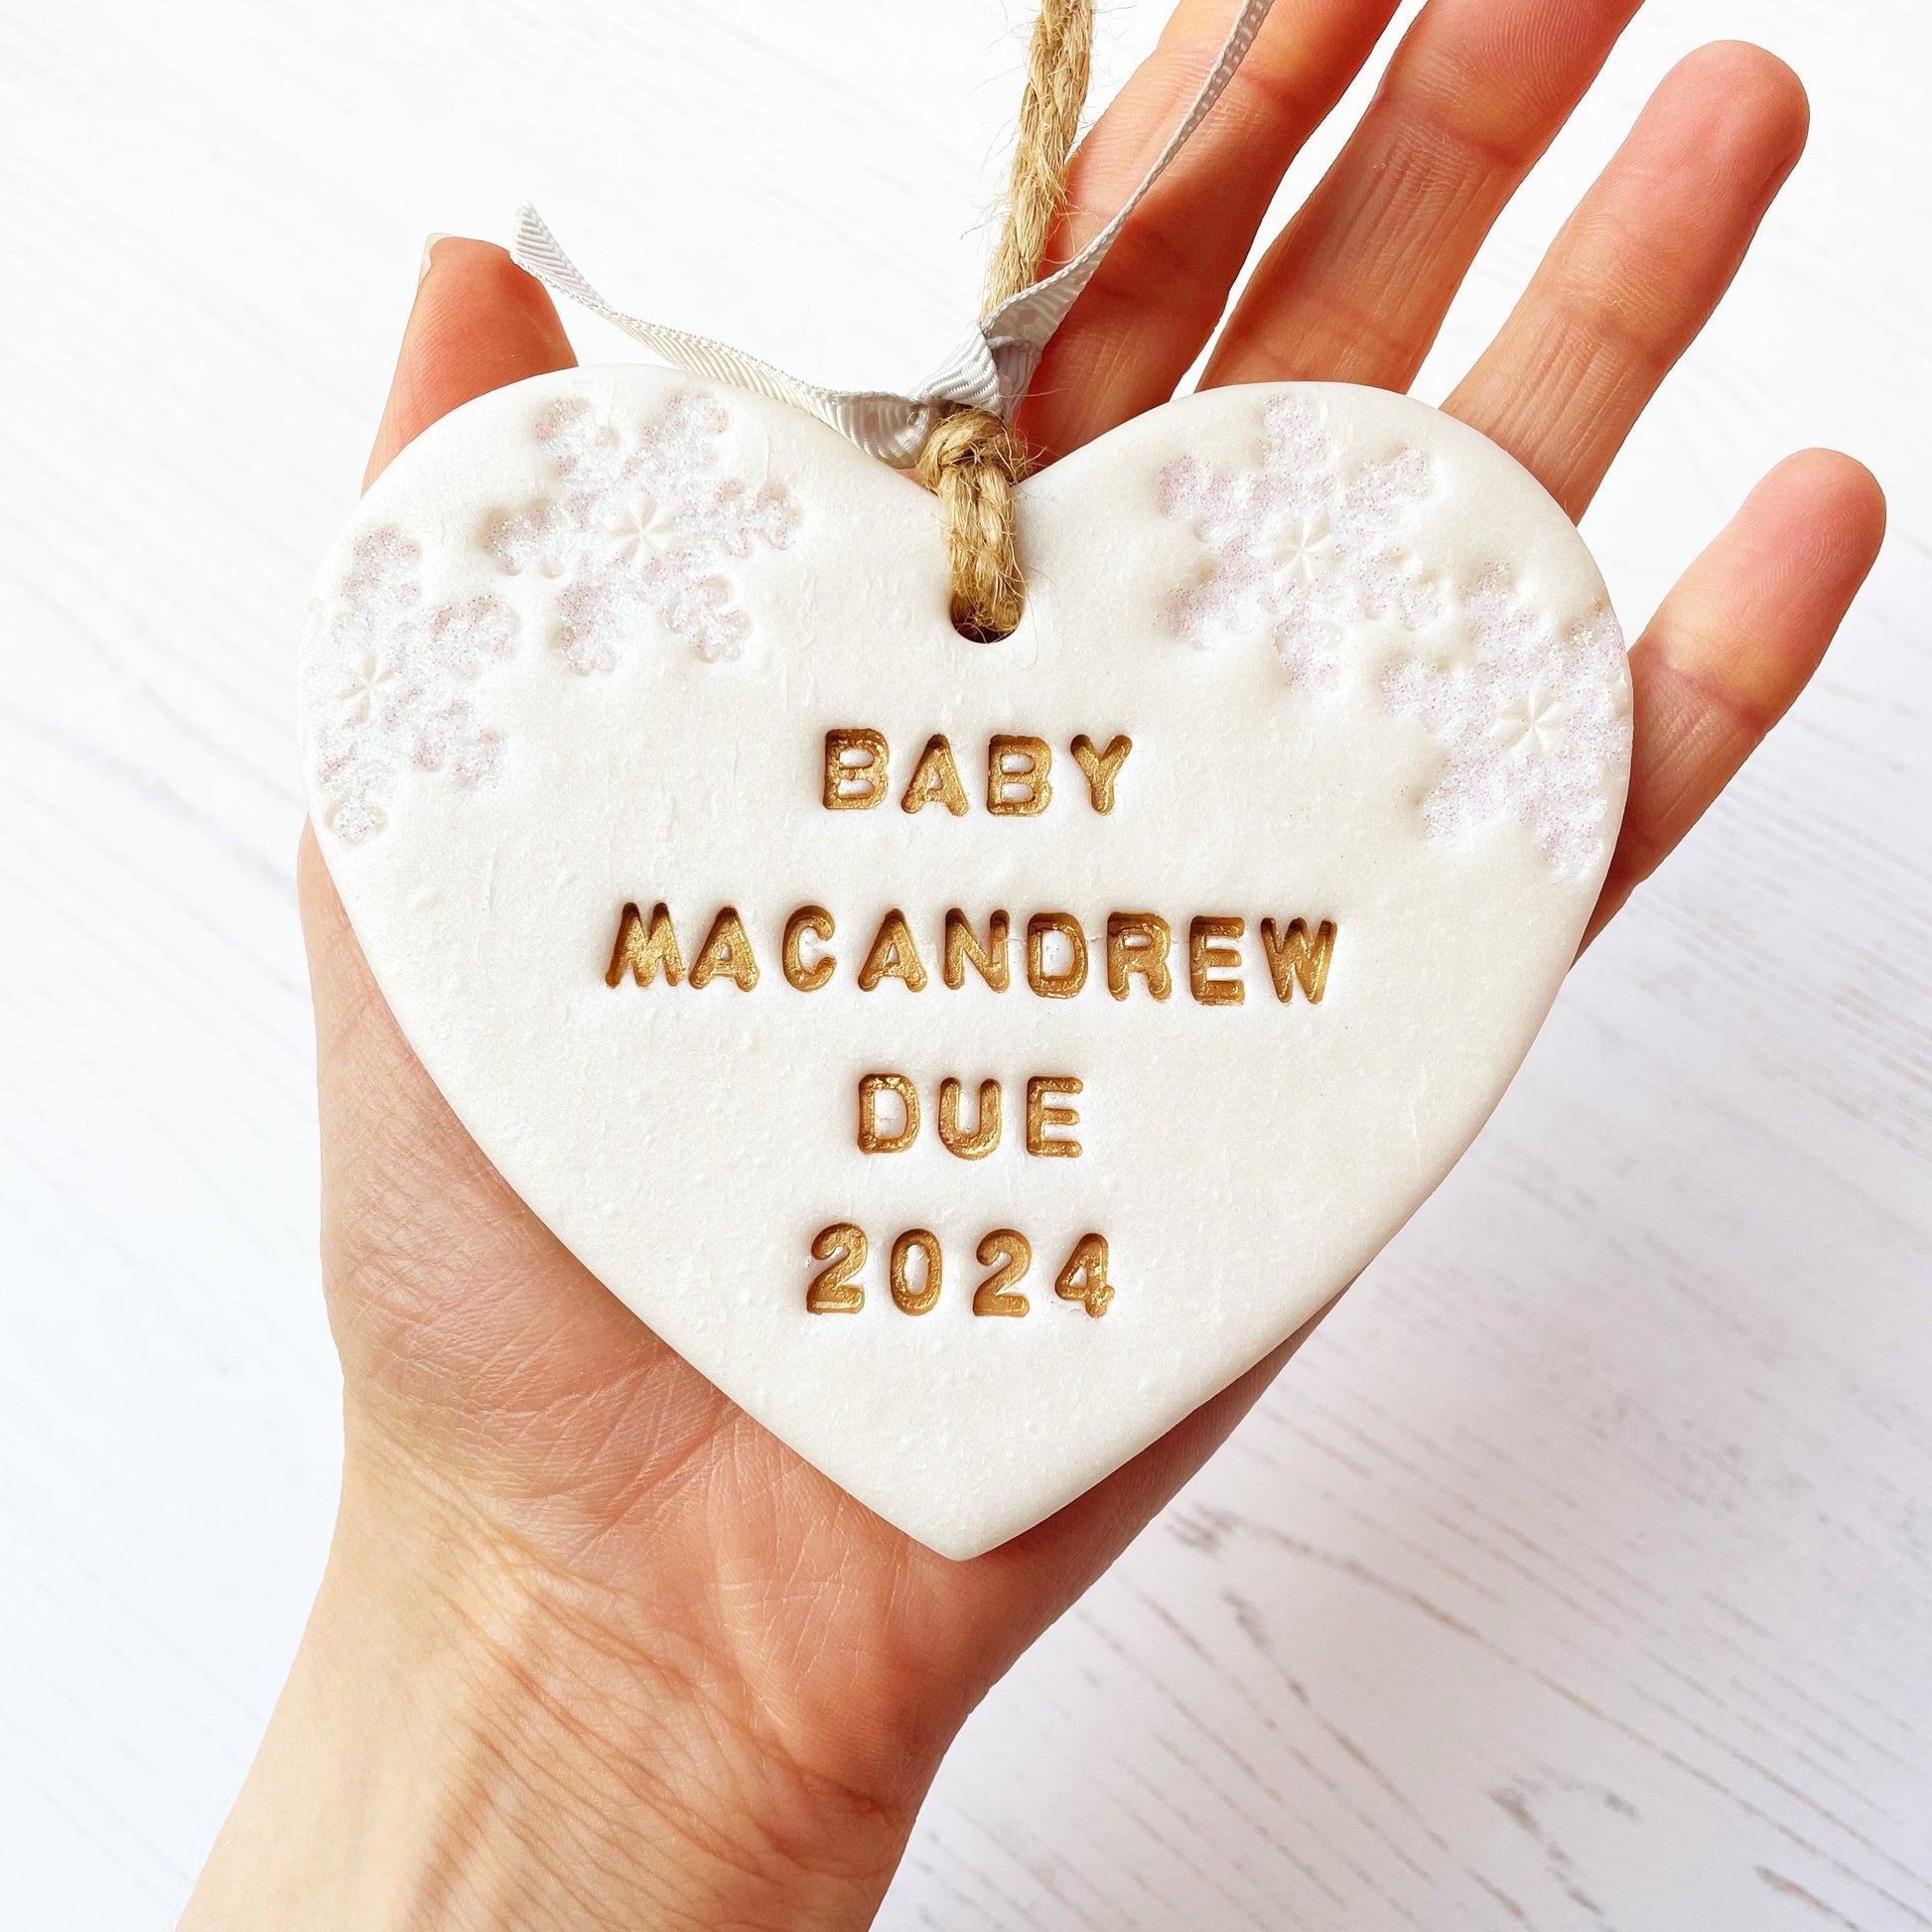 Personalised baby's first Christmas heart ornament, pearlised white clay with BABY MACANDREW DUE 2024 painted gold, decorated with 2 iridescent glitter snowflakes on either side of the top of the heart